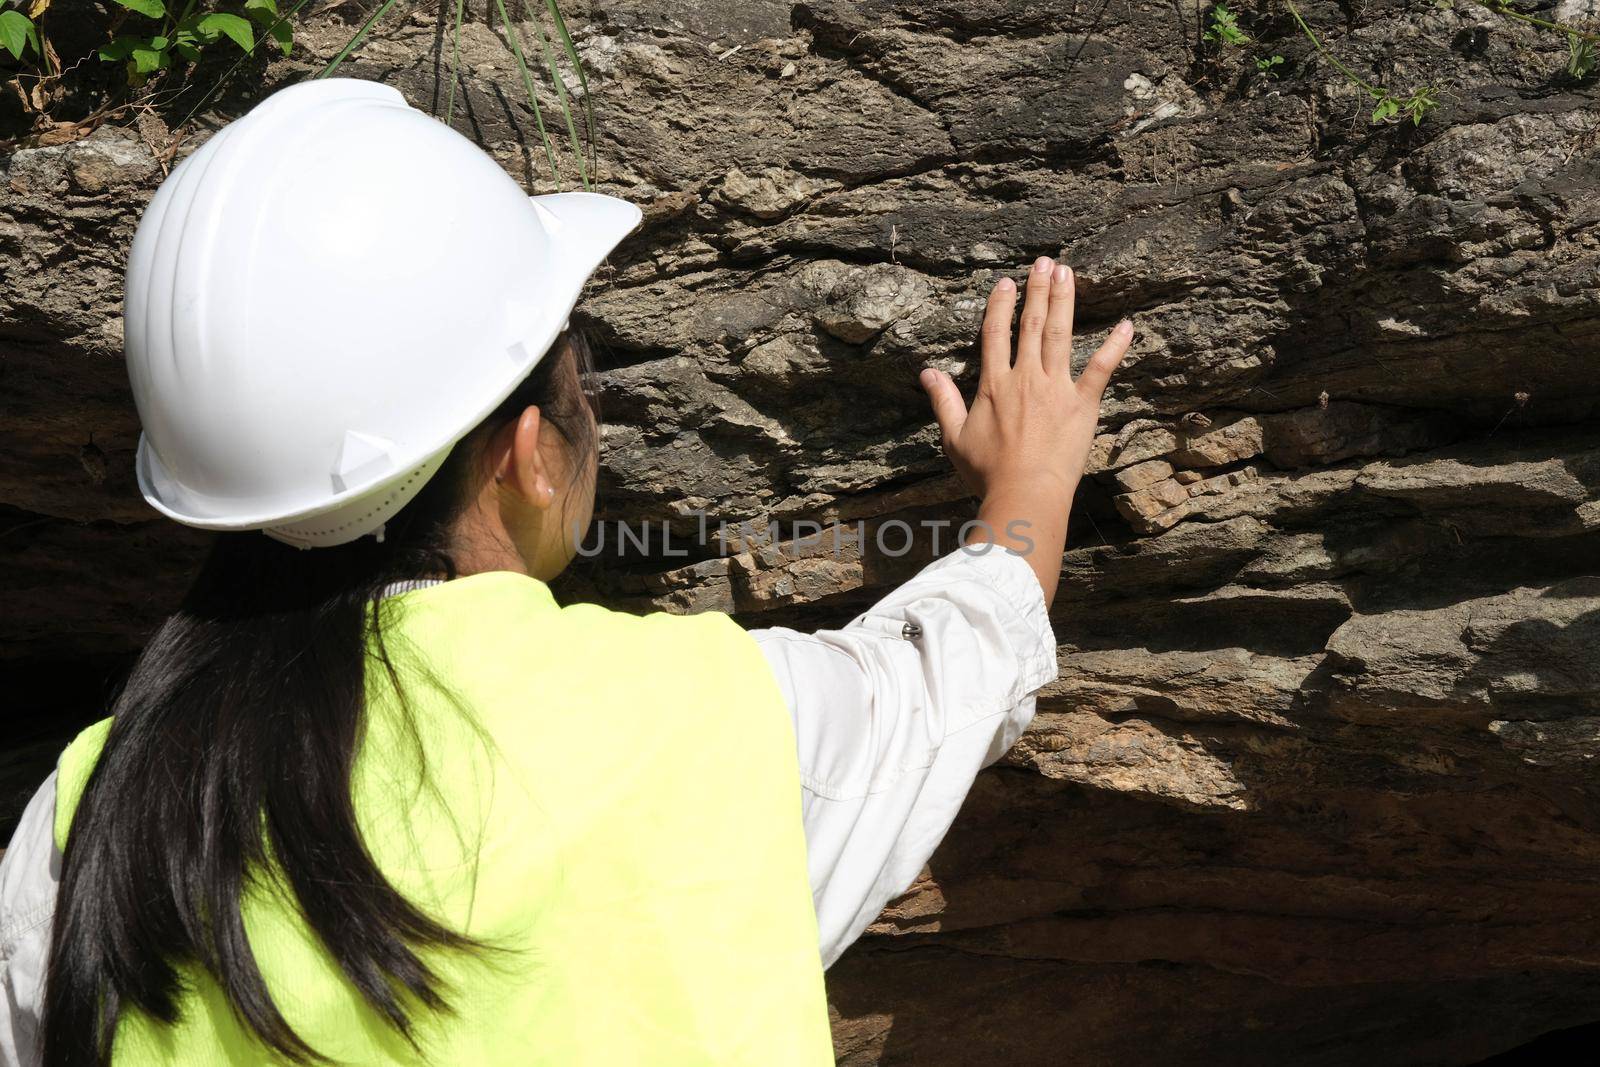 Asian female geologist researcher touches rocks with her hands to analyze surfaces in a natural park. Exploration Geologist in the Field. Stone and ecology concept.